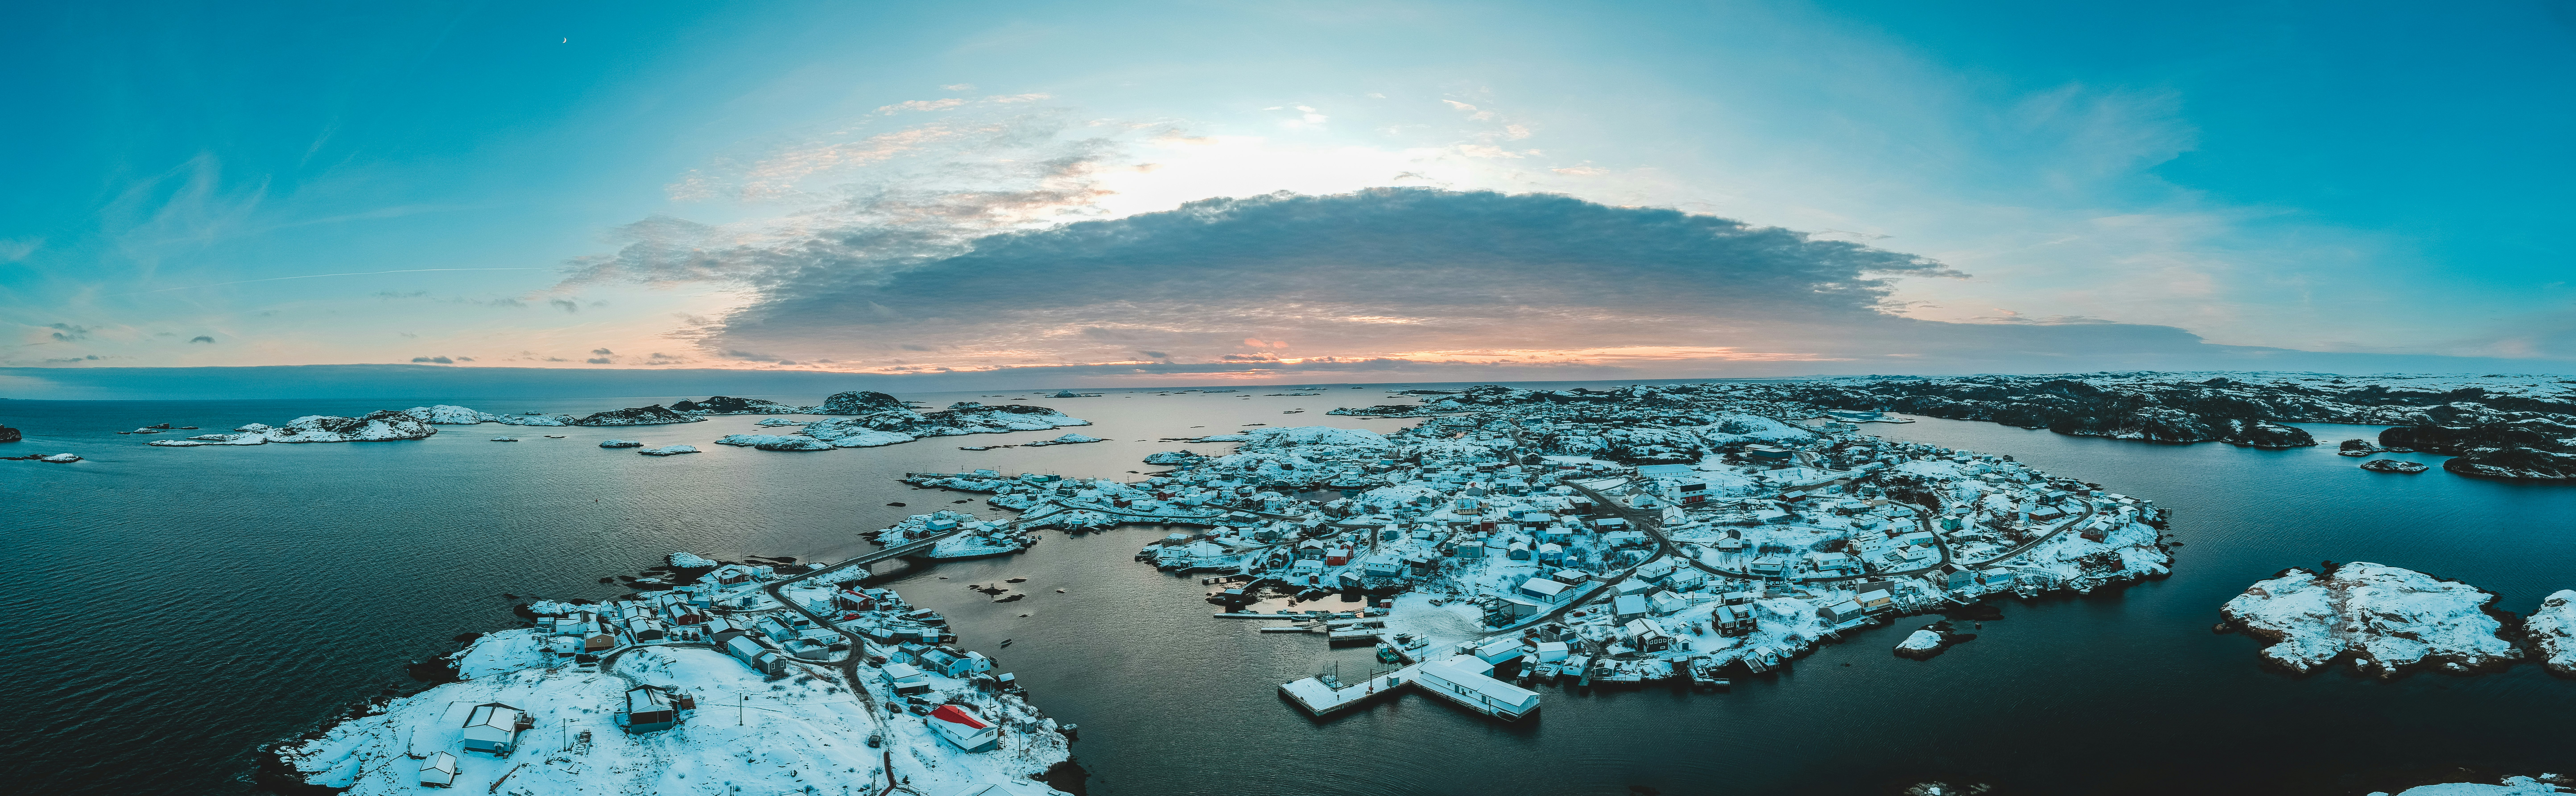 panoramic photography of snow-covered island during daytime